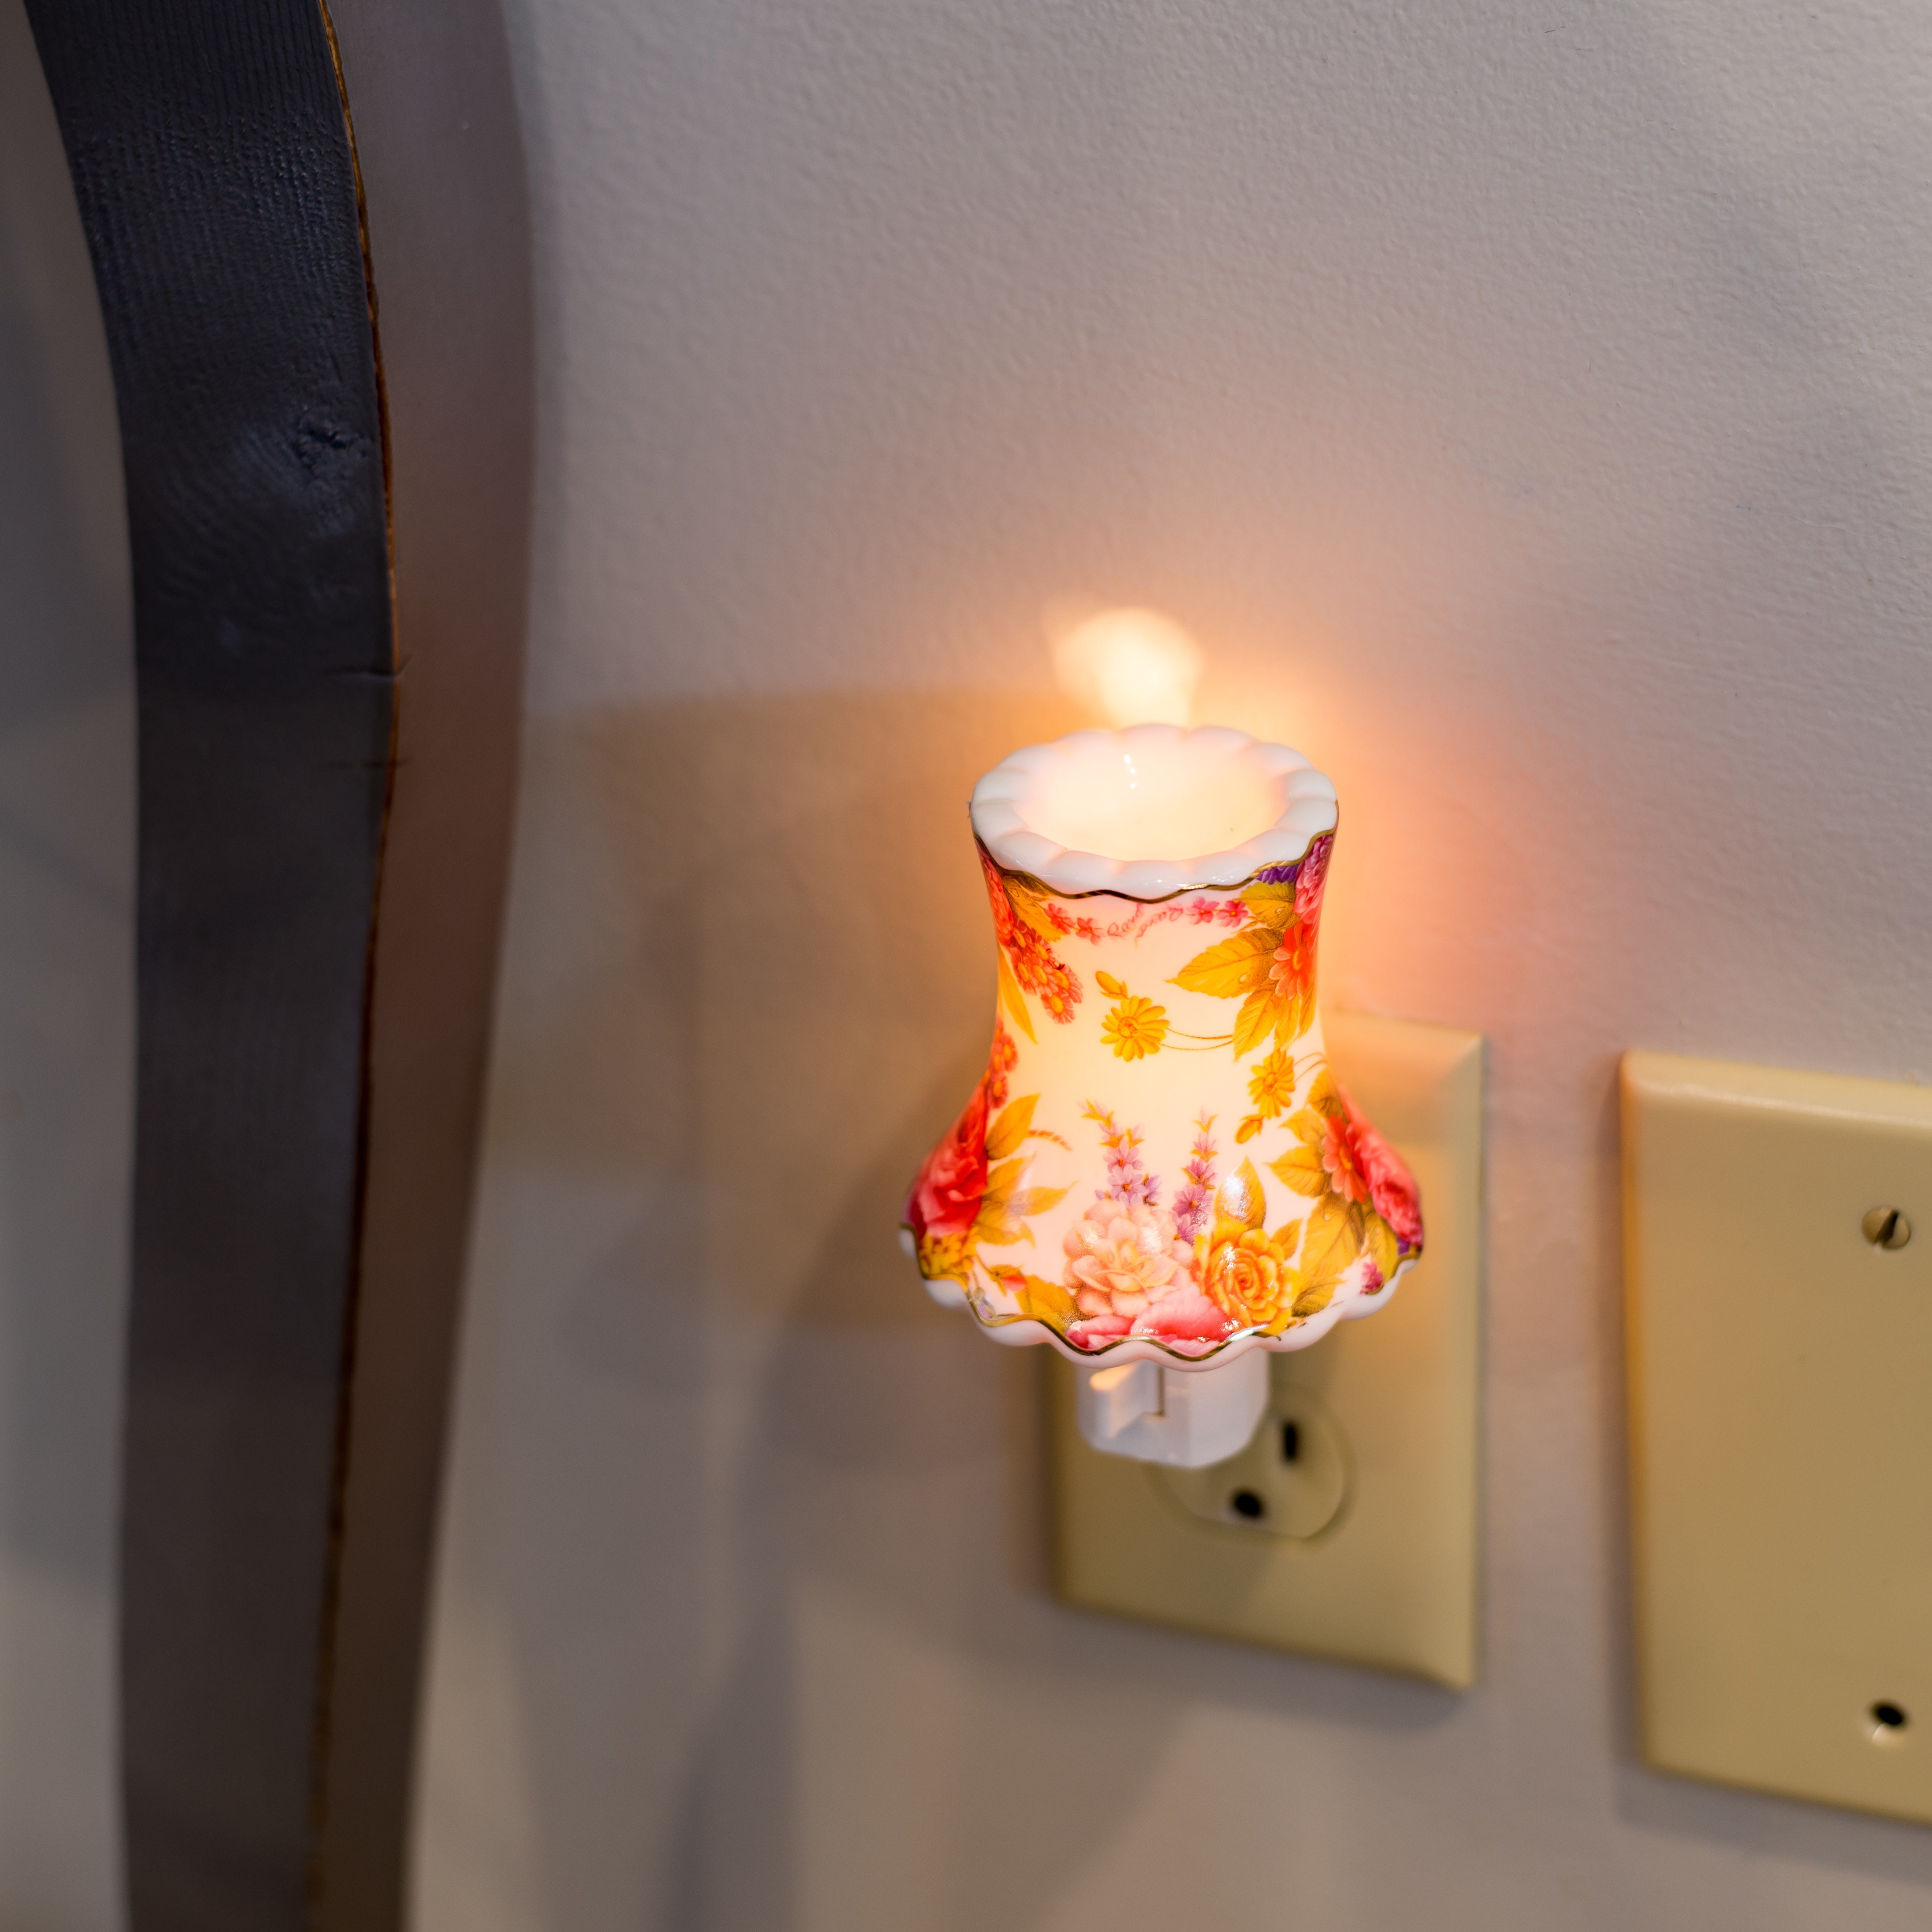 Floral Mini Lampshade 3 x 4 Porcelain Wall Plug-In Night Light Gift Connection 